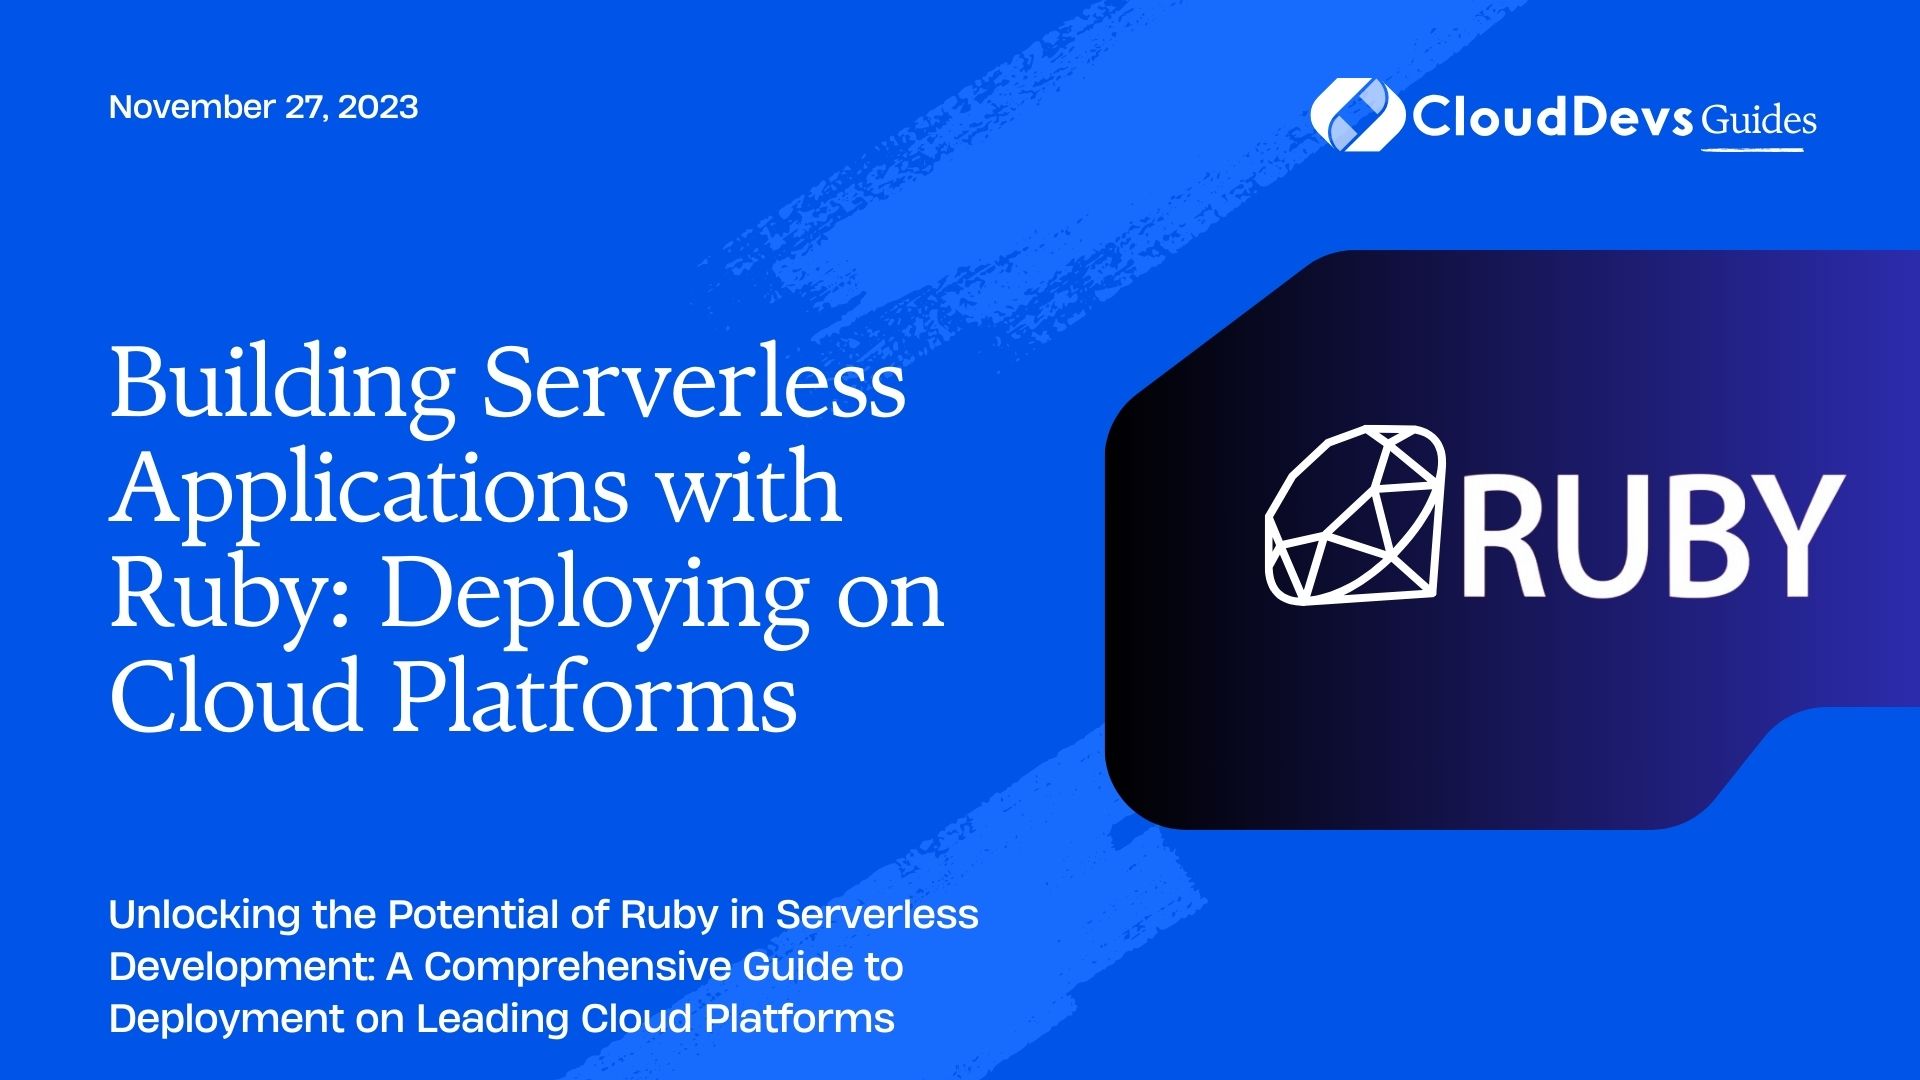 Building Serverless Applications with Ruby: Deploying on Cloud Platforms